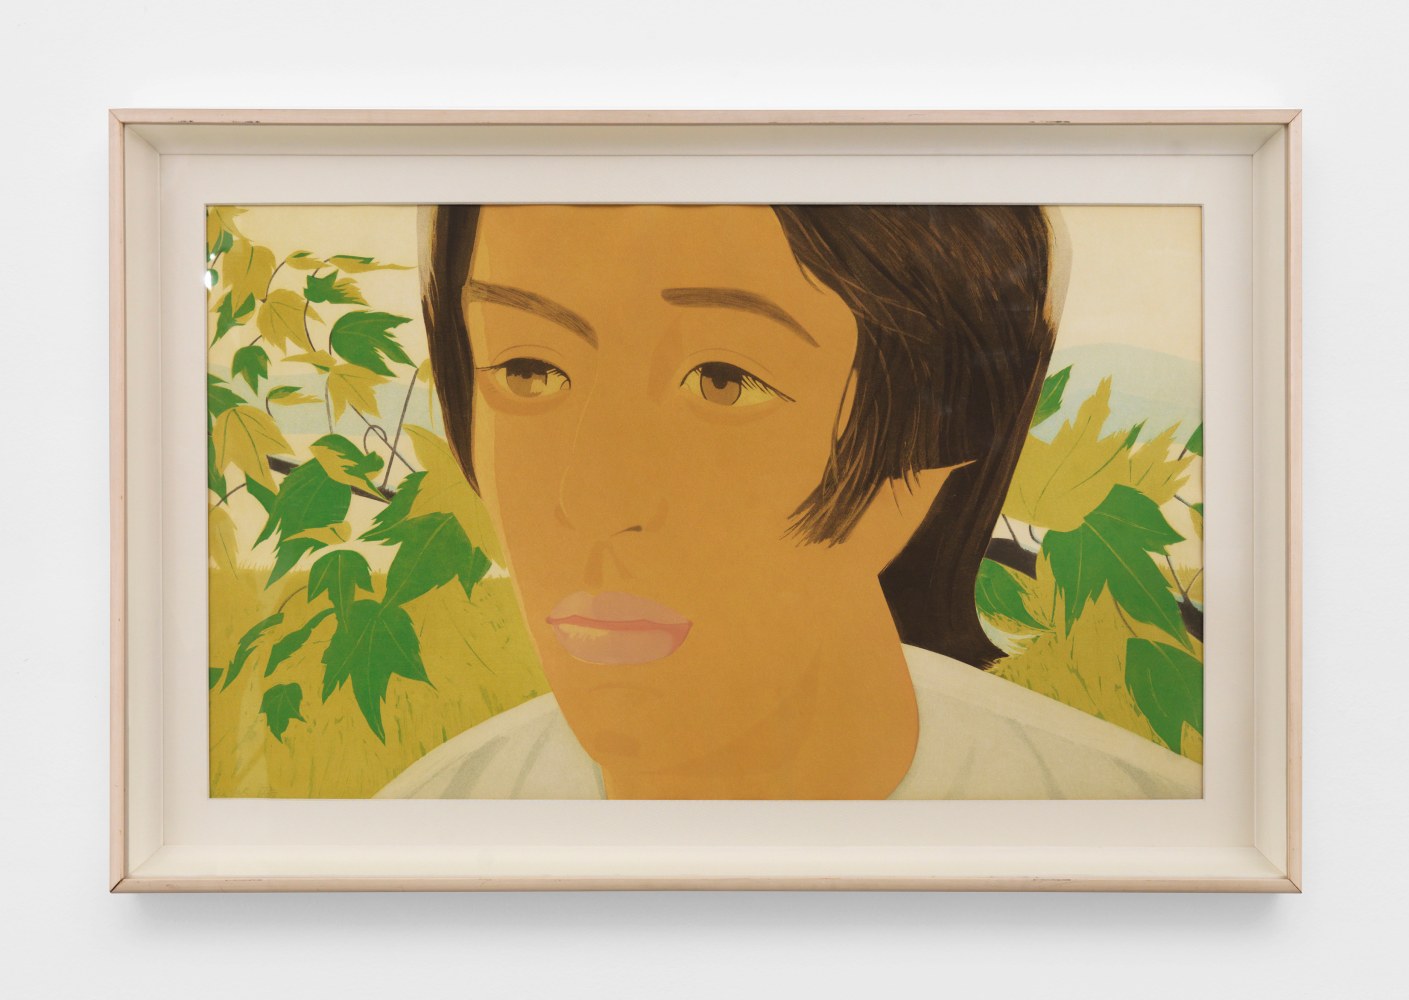 An earth toned Alex Katz aquatint of a boy with dark brown hair looking to the left surrounded by leaves with faint mountains in the back